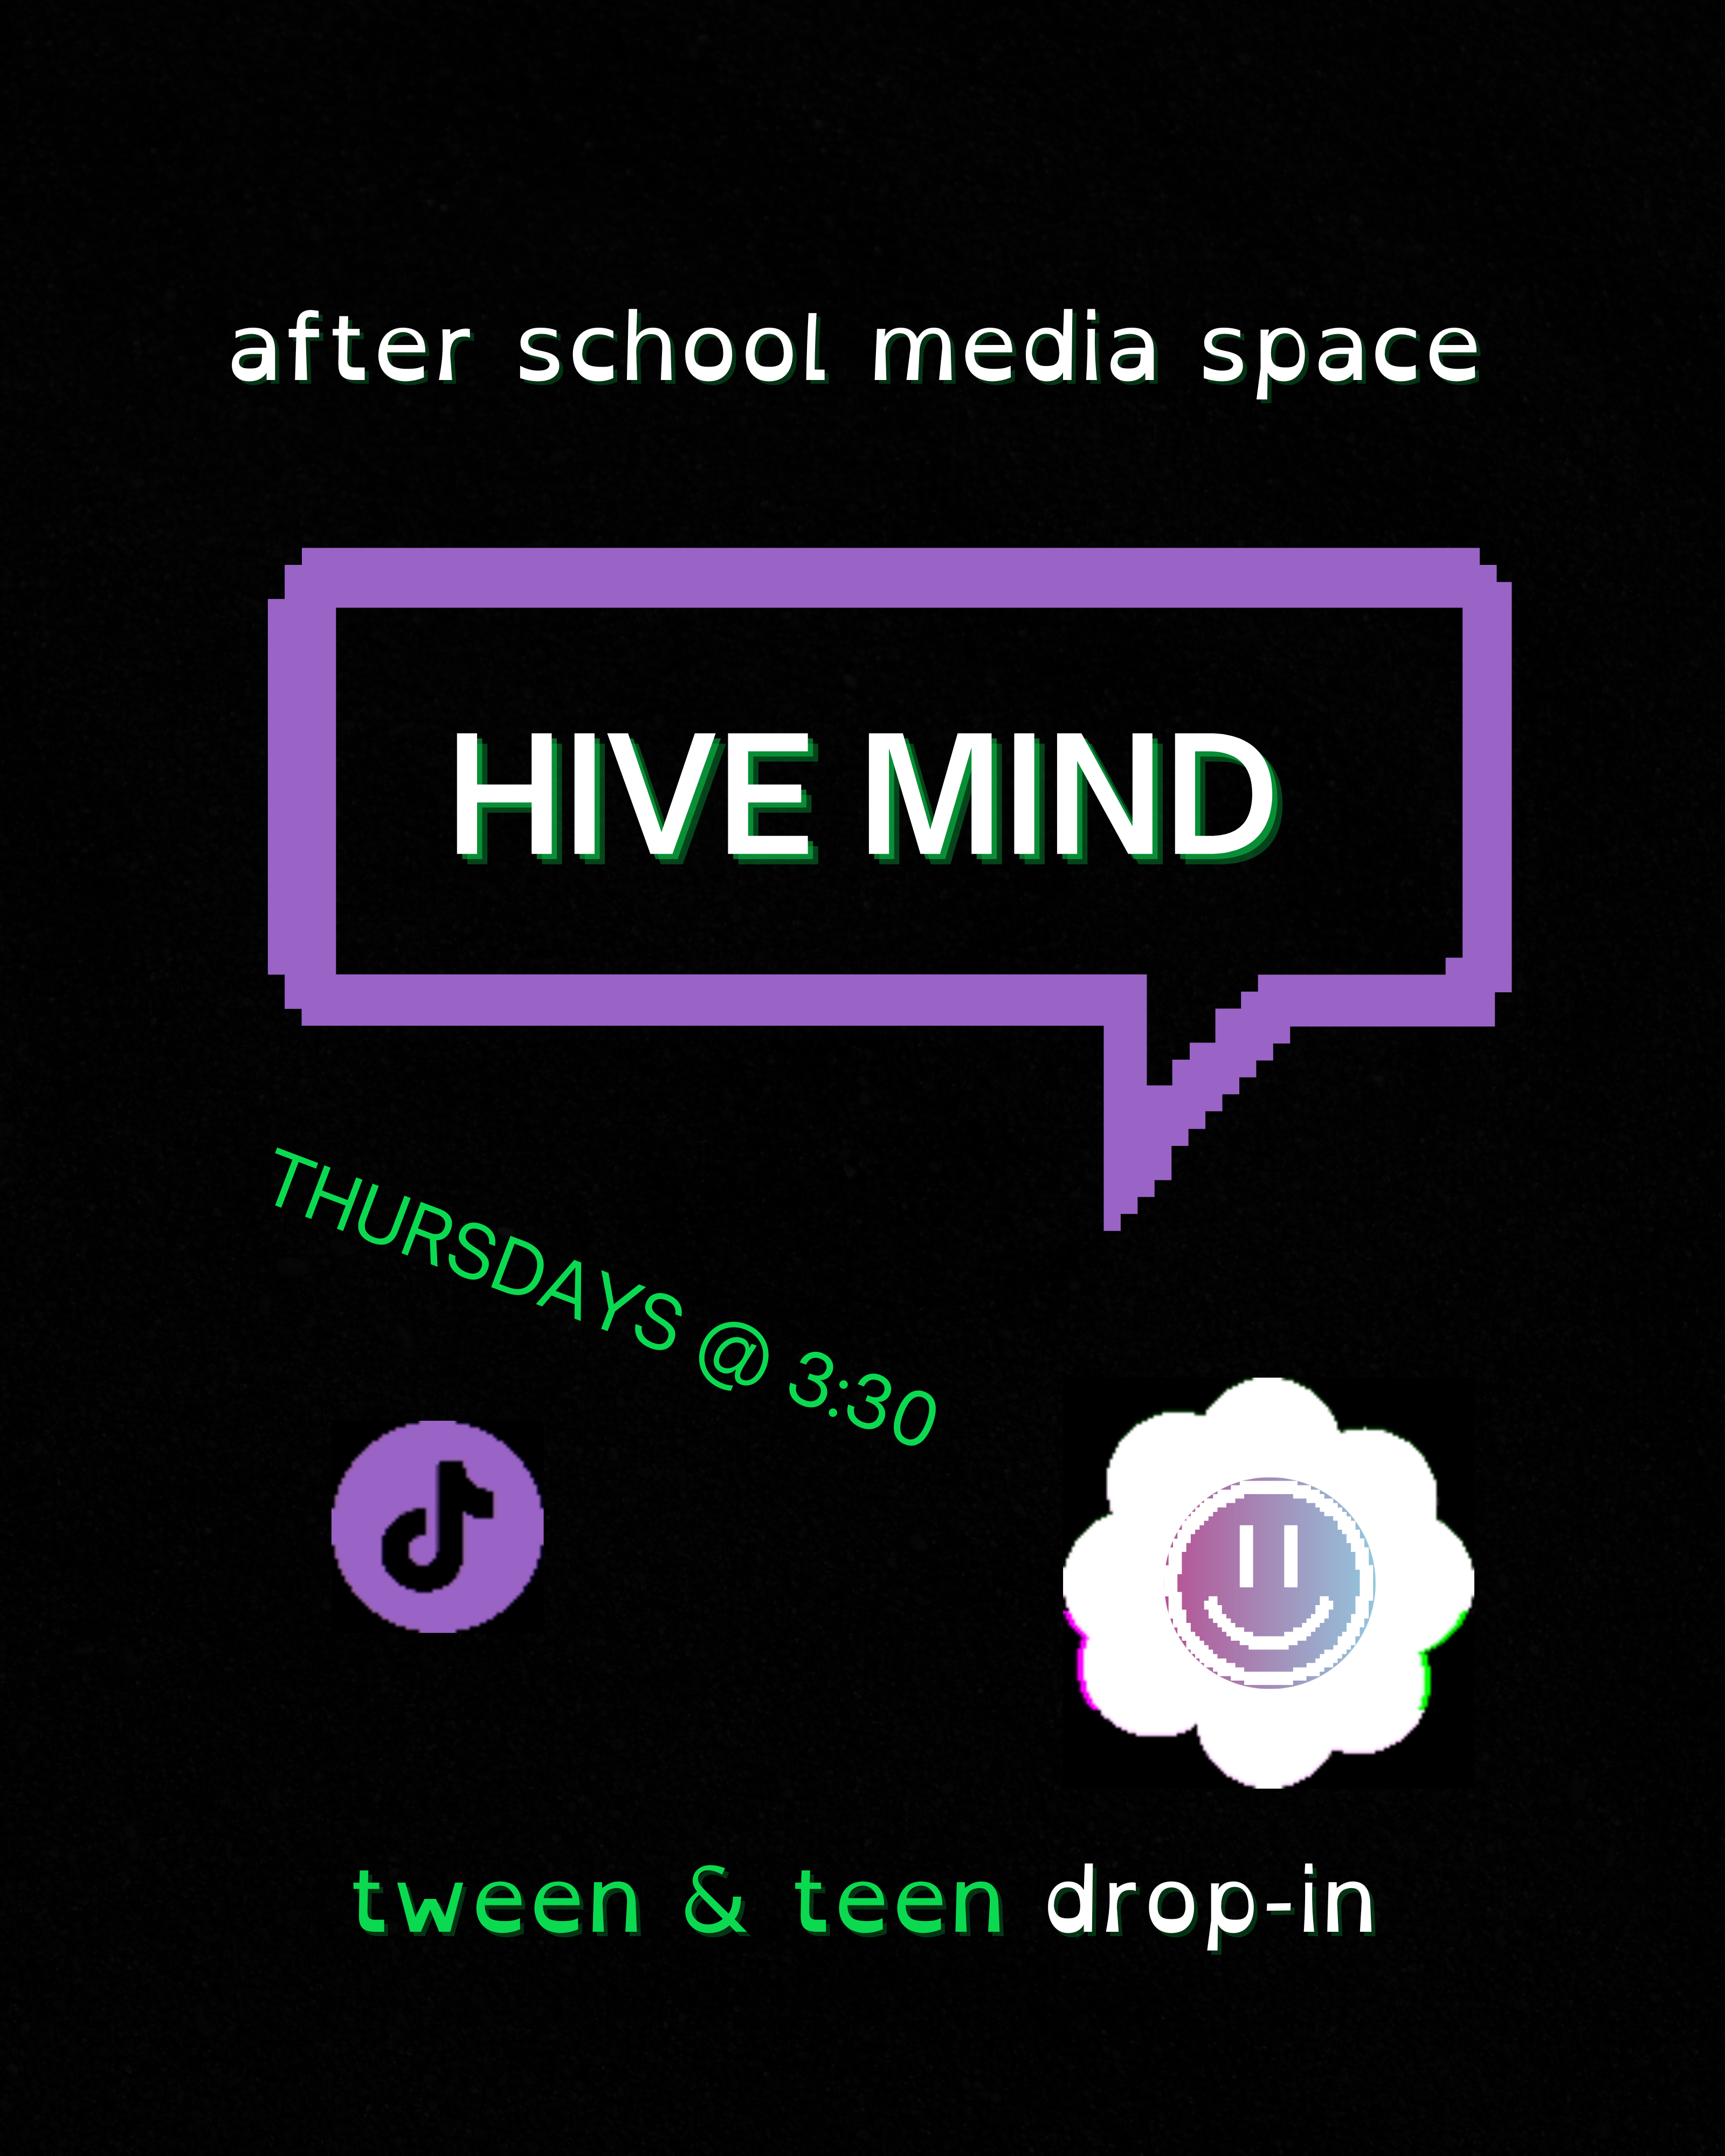 Event promo for Hive Mind. Headline: after school media space. Subheadings: Thursdays at 3:30. Tween & teen drop-in.Features TikTok logo.